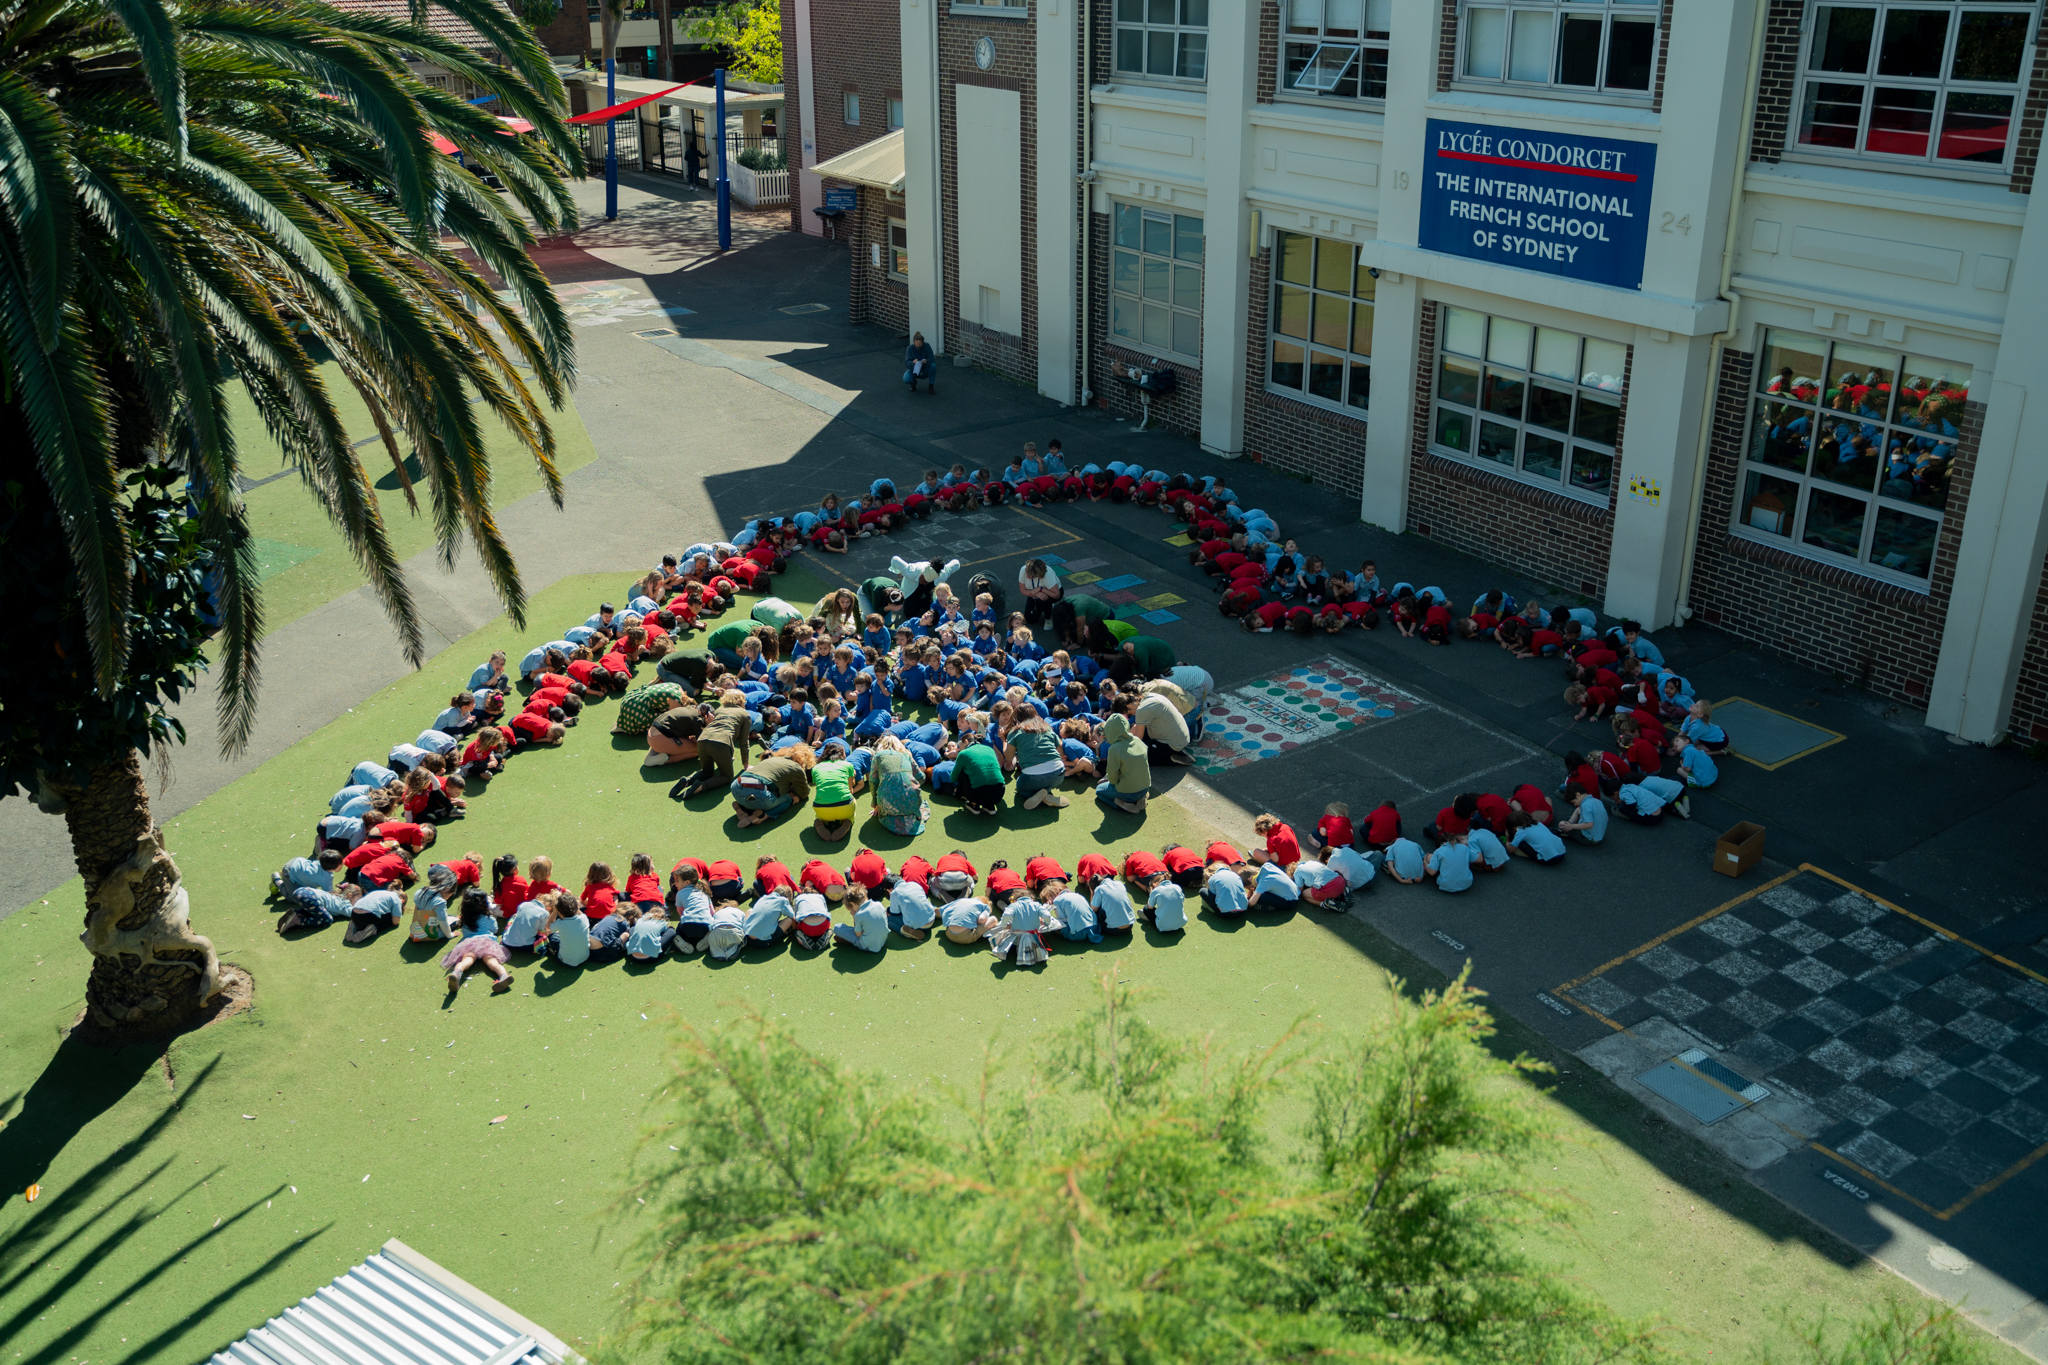 LCS students on School Strike 4 Climate day